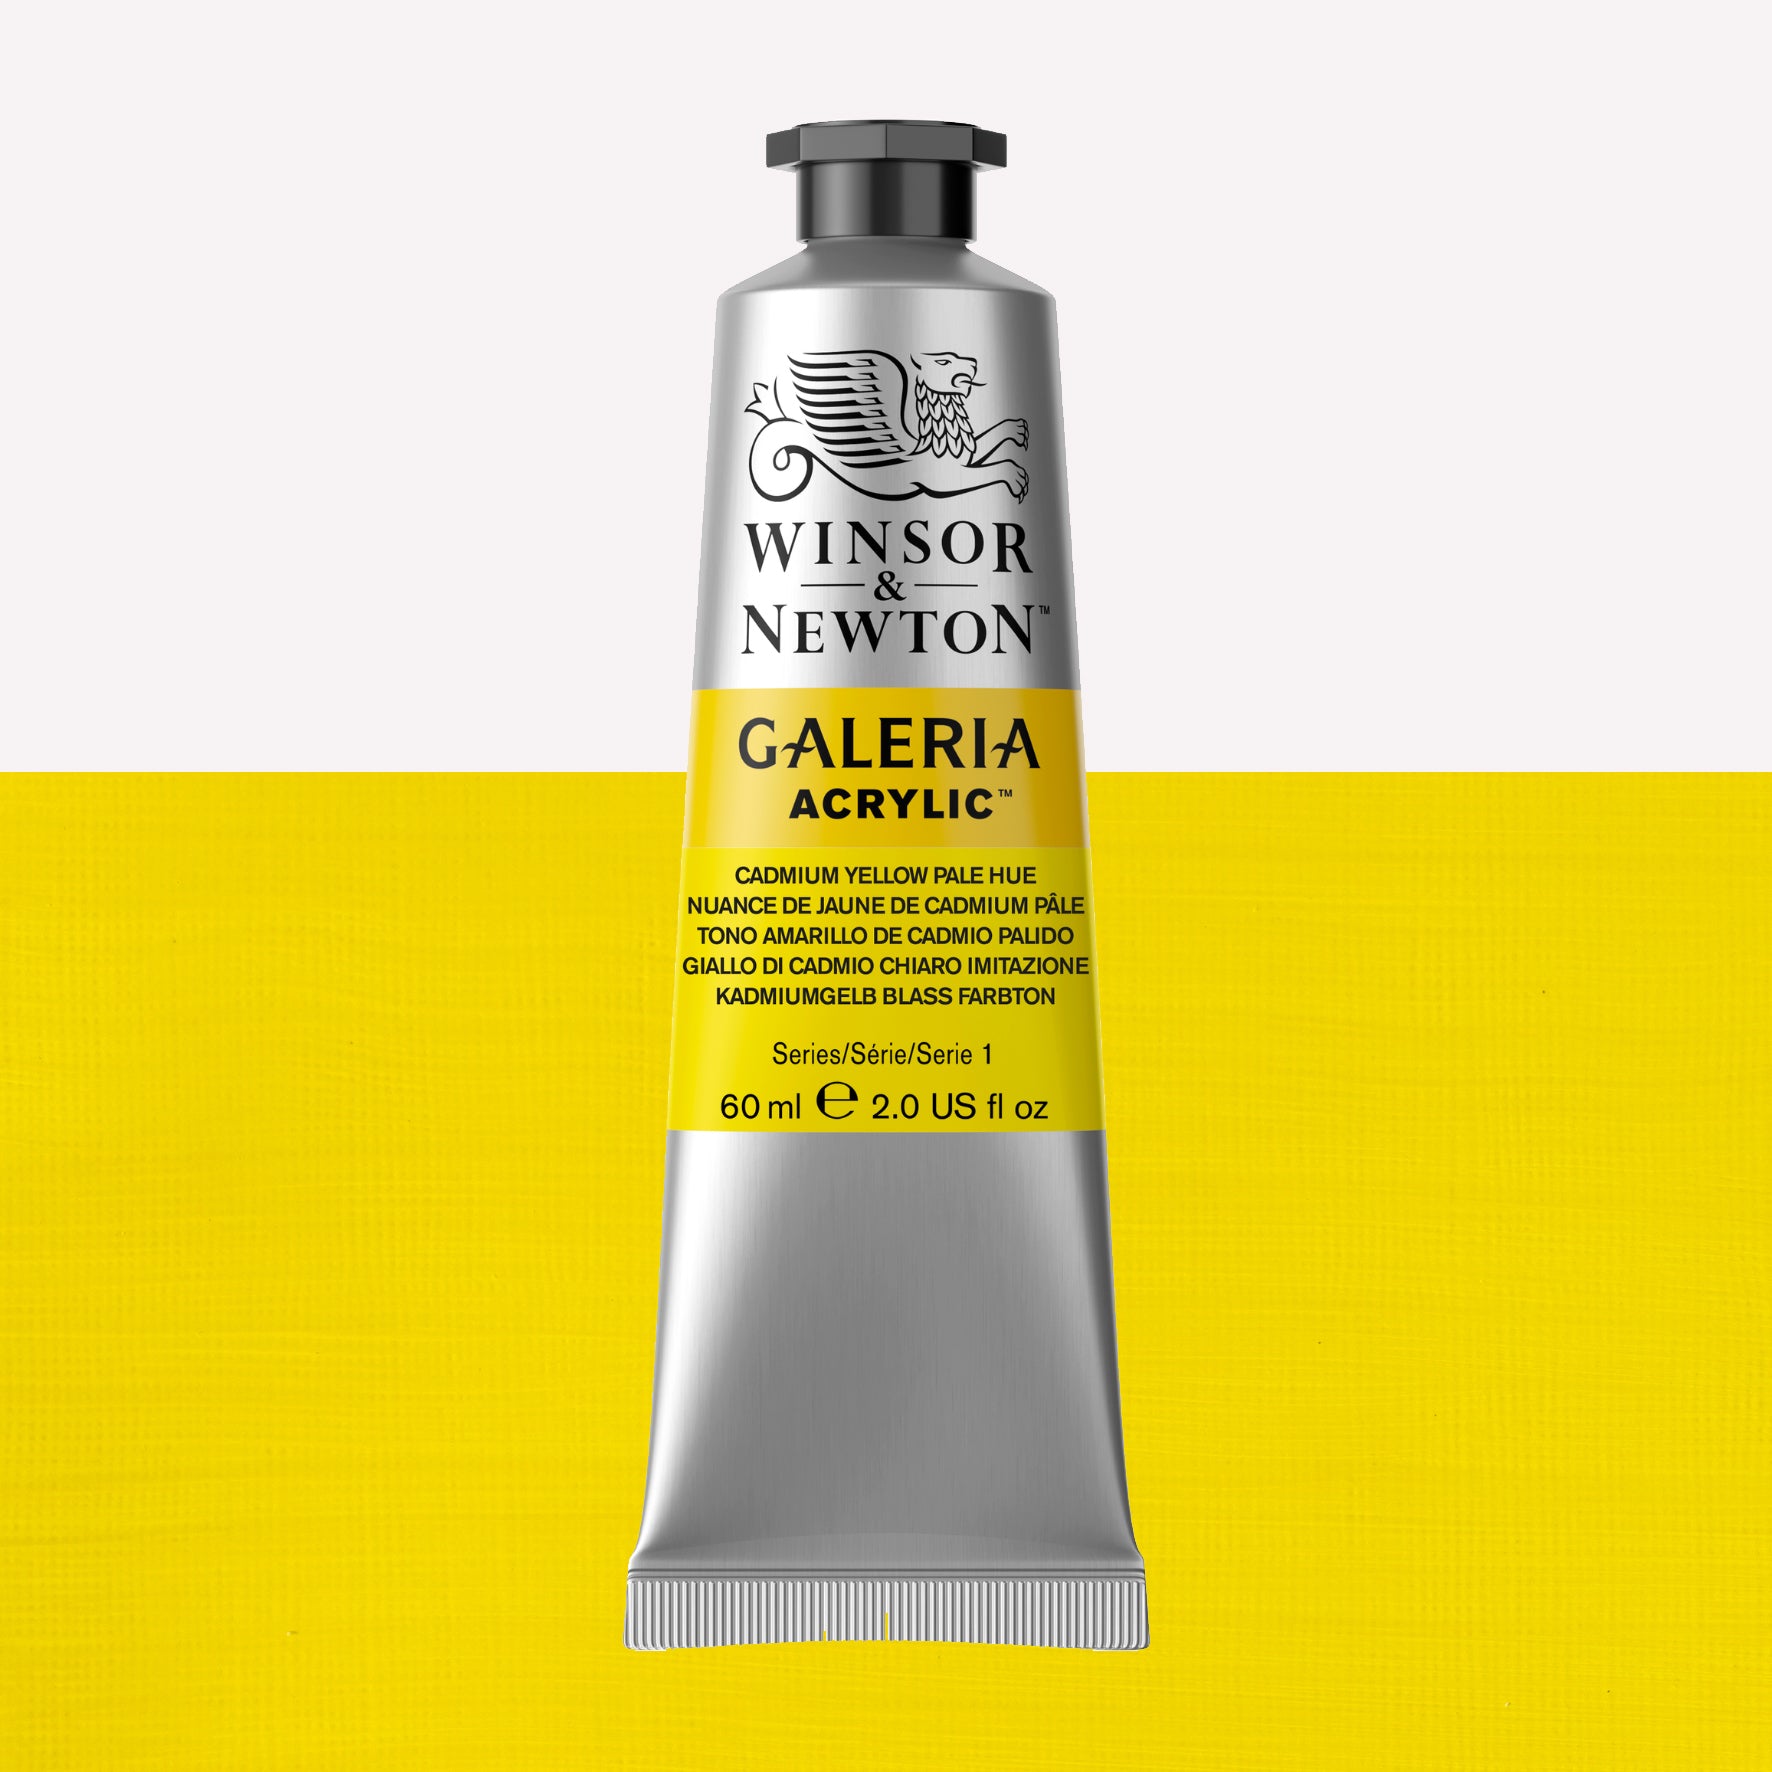 A 60ml tube of vibrant Galeria Acrylic paint in the shade Cadmium Yellow Pale Hue. This paint, made by Winsor and Newton, is packaged in a silver tube with a black lid. 